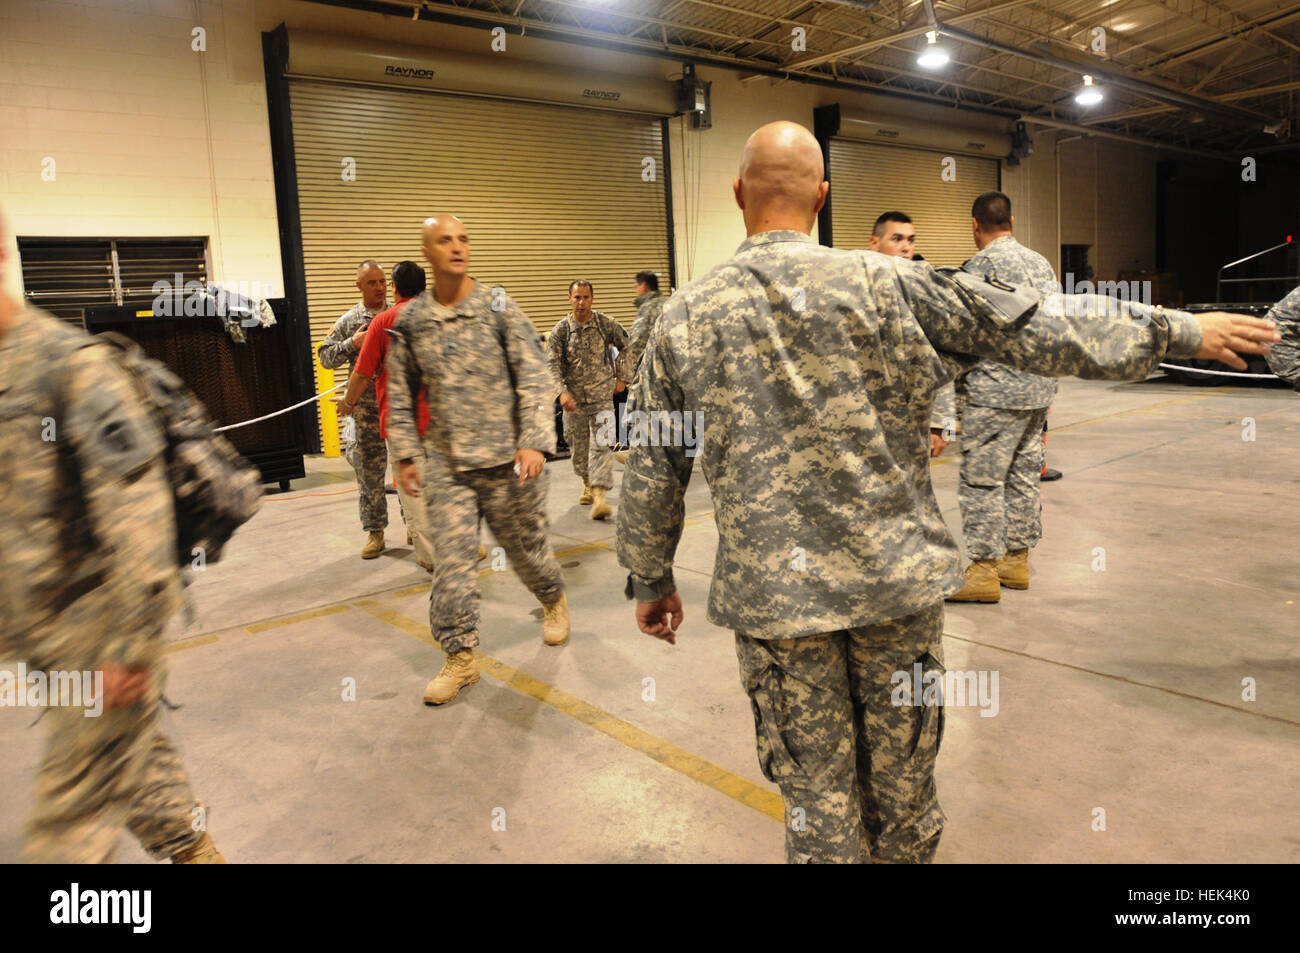 In this image released by the Texas Army National Guard, combat medic Sgt. 1st Class Trenton Puckett, from San Antonio, of the Headquarters Company, 1st Battalion of the 141st Infantry Regiment, 72nd Infantry Brigade Combat Team, soldiers with the Alpha and Bravo Company, 1/141 into the correct check-in line after arriving at Biggs Airfield, Fort Bliss, Texas, July 12. Puckett is part of the advanced party sent to Fort Bliss to facilitate the 72nd IBCT movement back into the U.S. after their Iraq deployment. Alpha and Bravo Company were deployed to Camp Victory, Baghdad in Dec. 2009 and charge Stock Photo